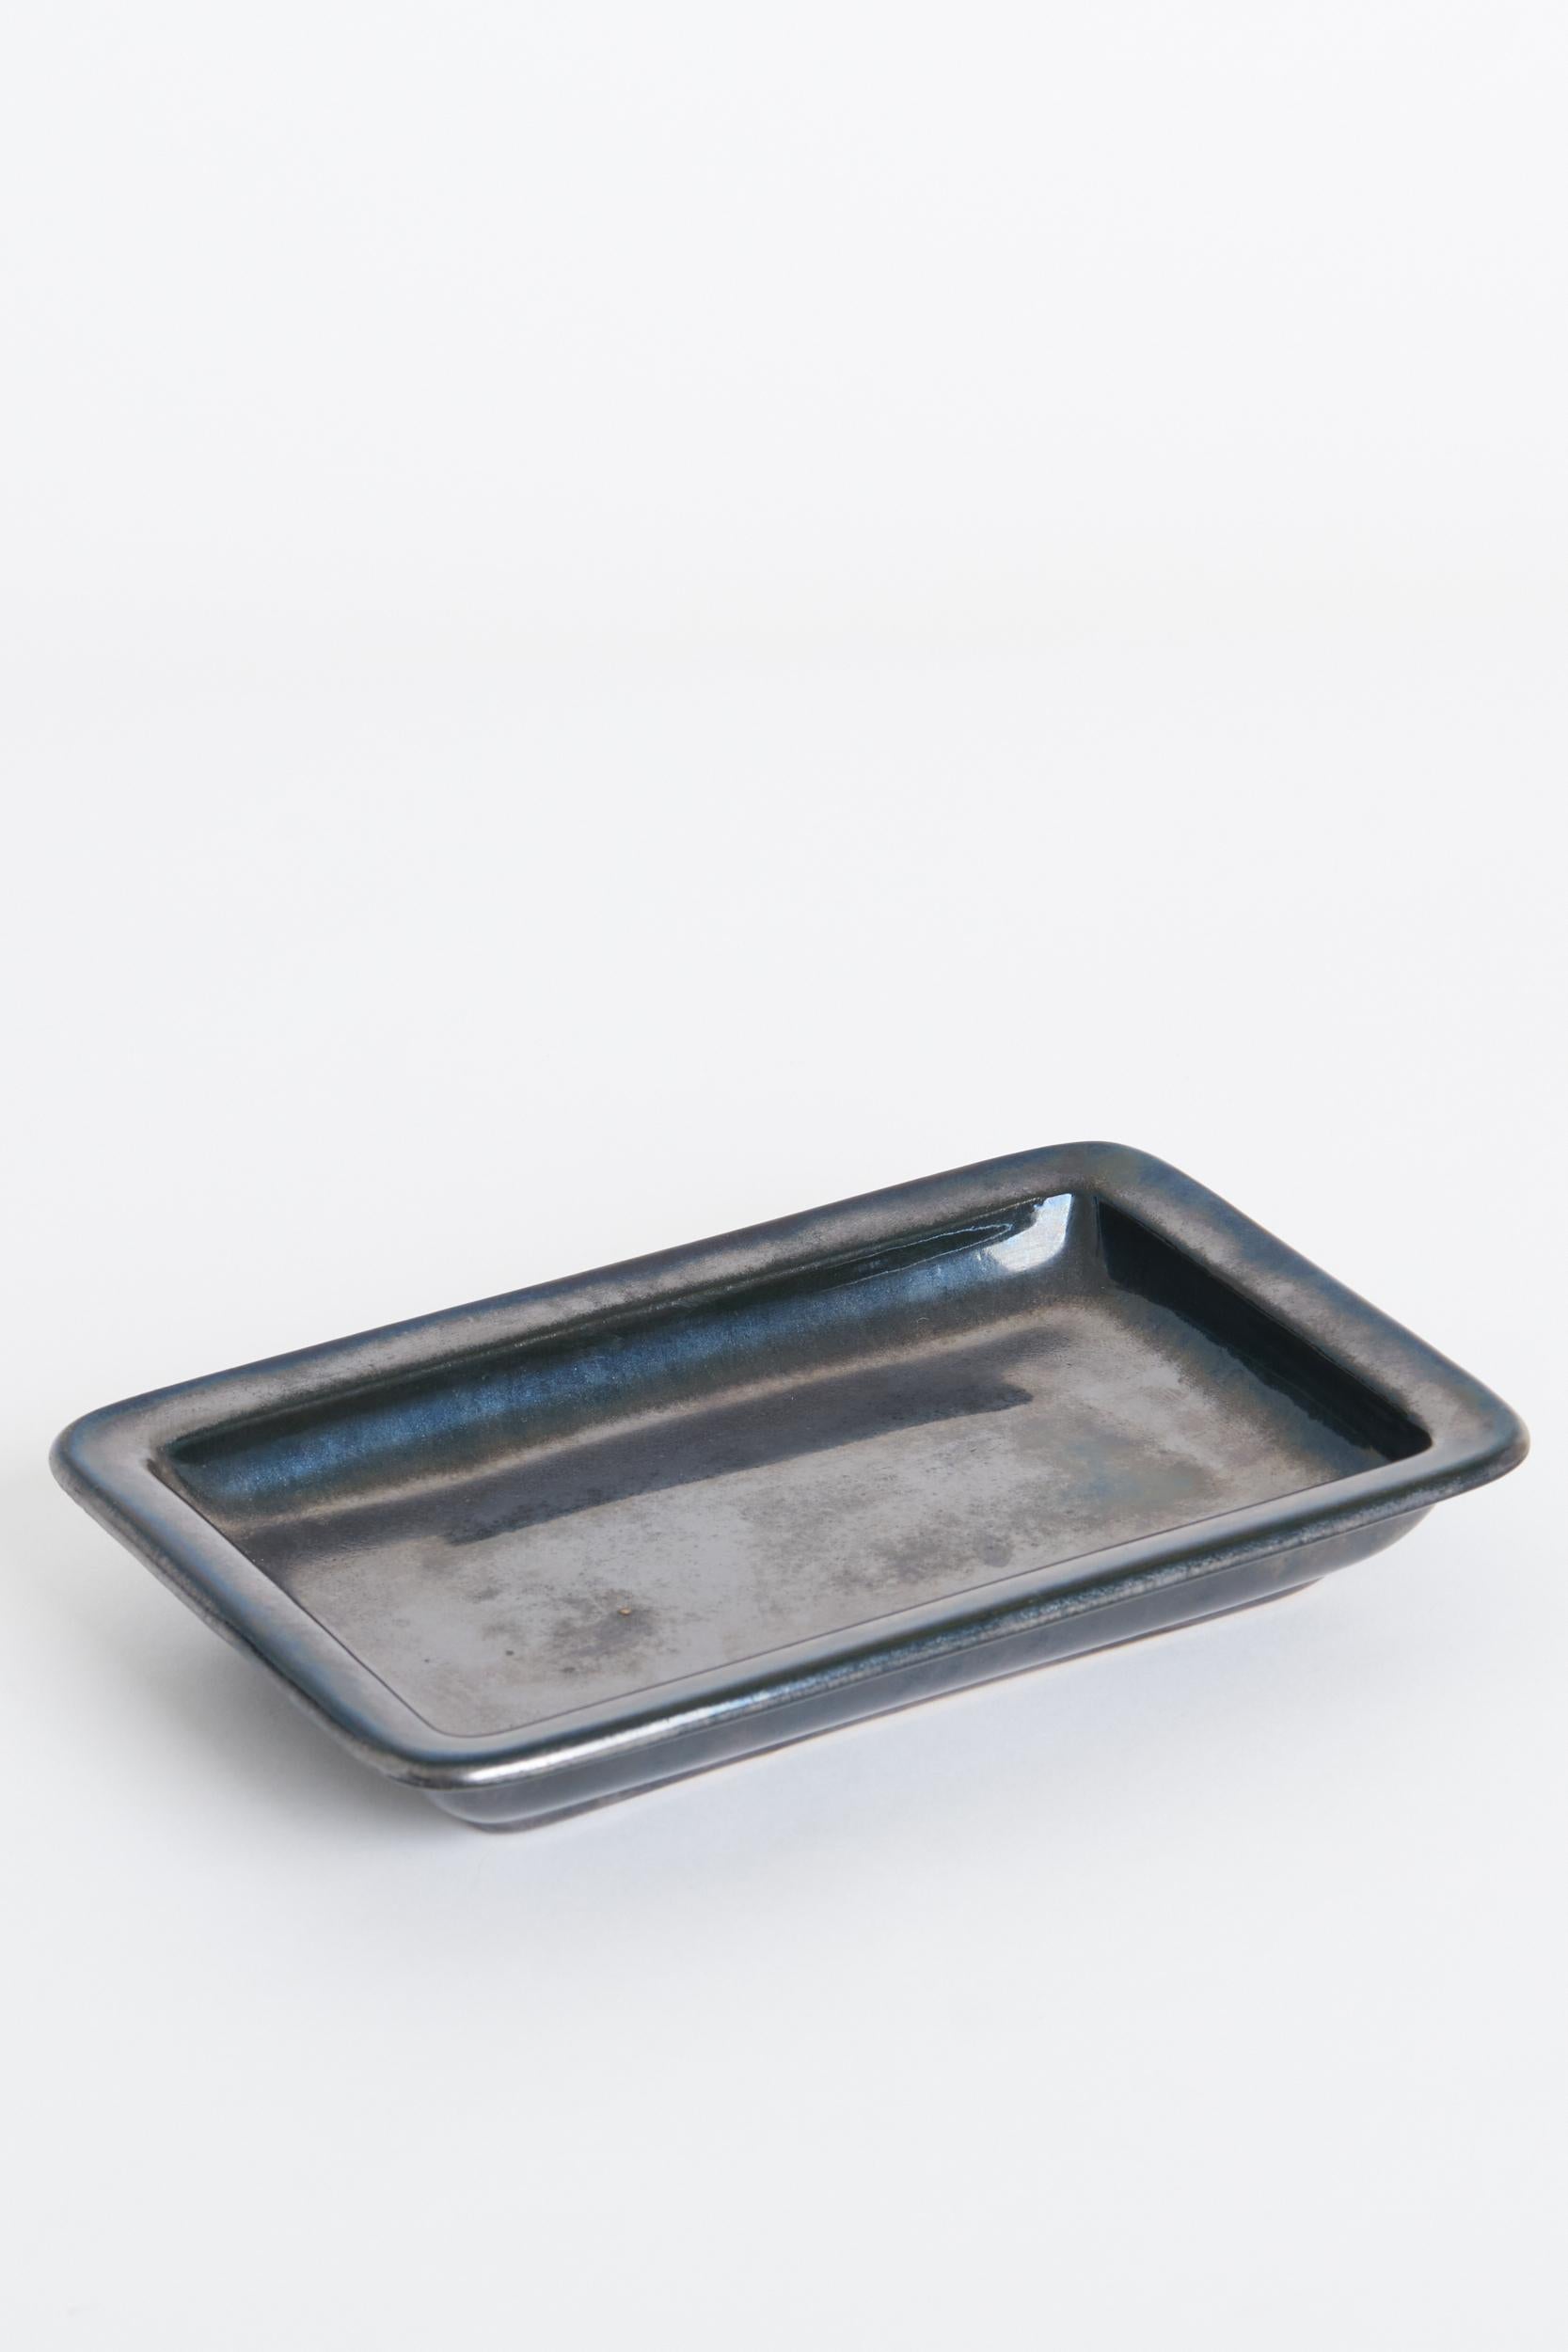 A black ceramic rectangular vide poche by Alice Sordet-Bonifas - aka Lifas (1902-1975).
Signed. 
France or Switzerland, Mid-20th Century
3 cm high by 21 cm wide by 14 cm depth.